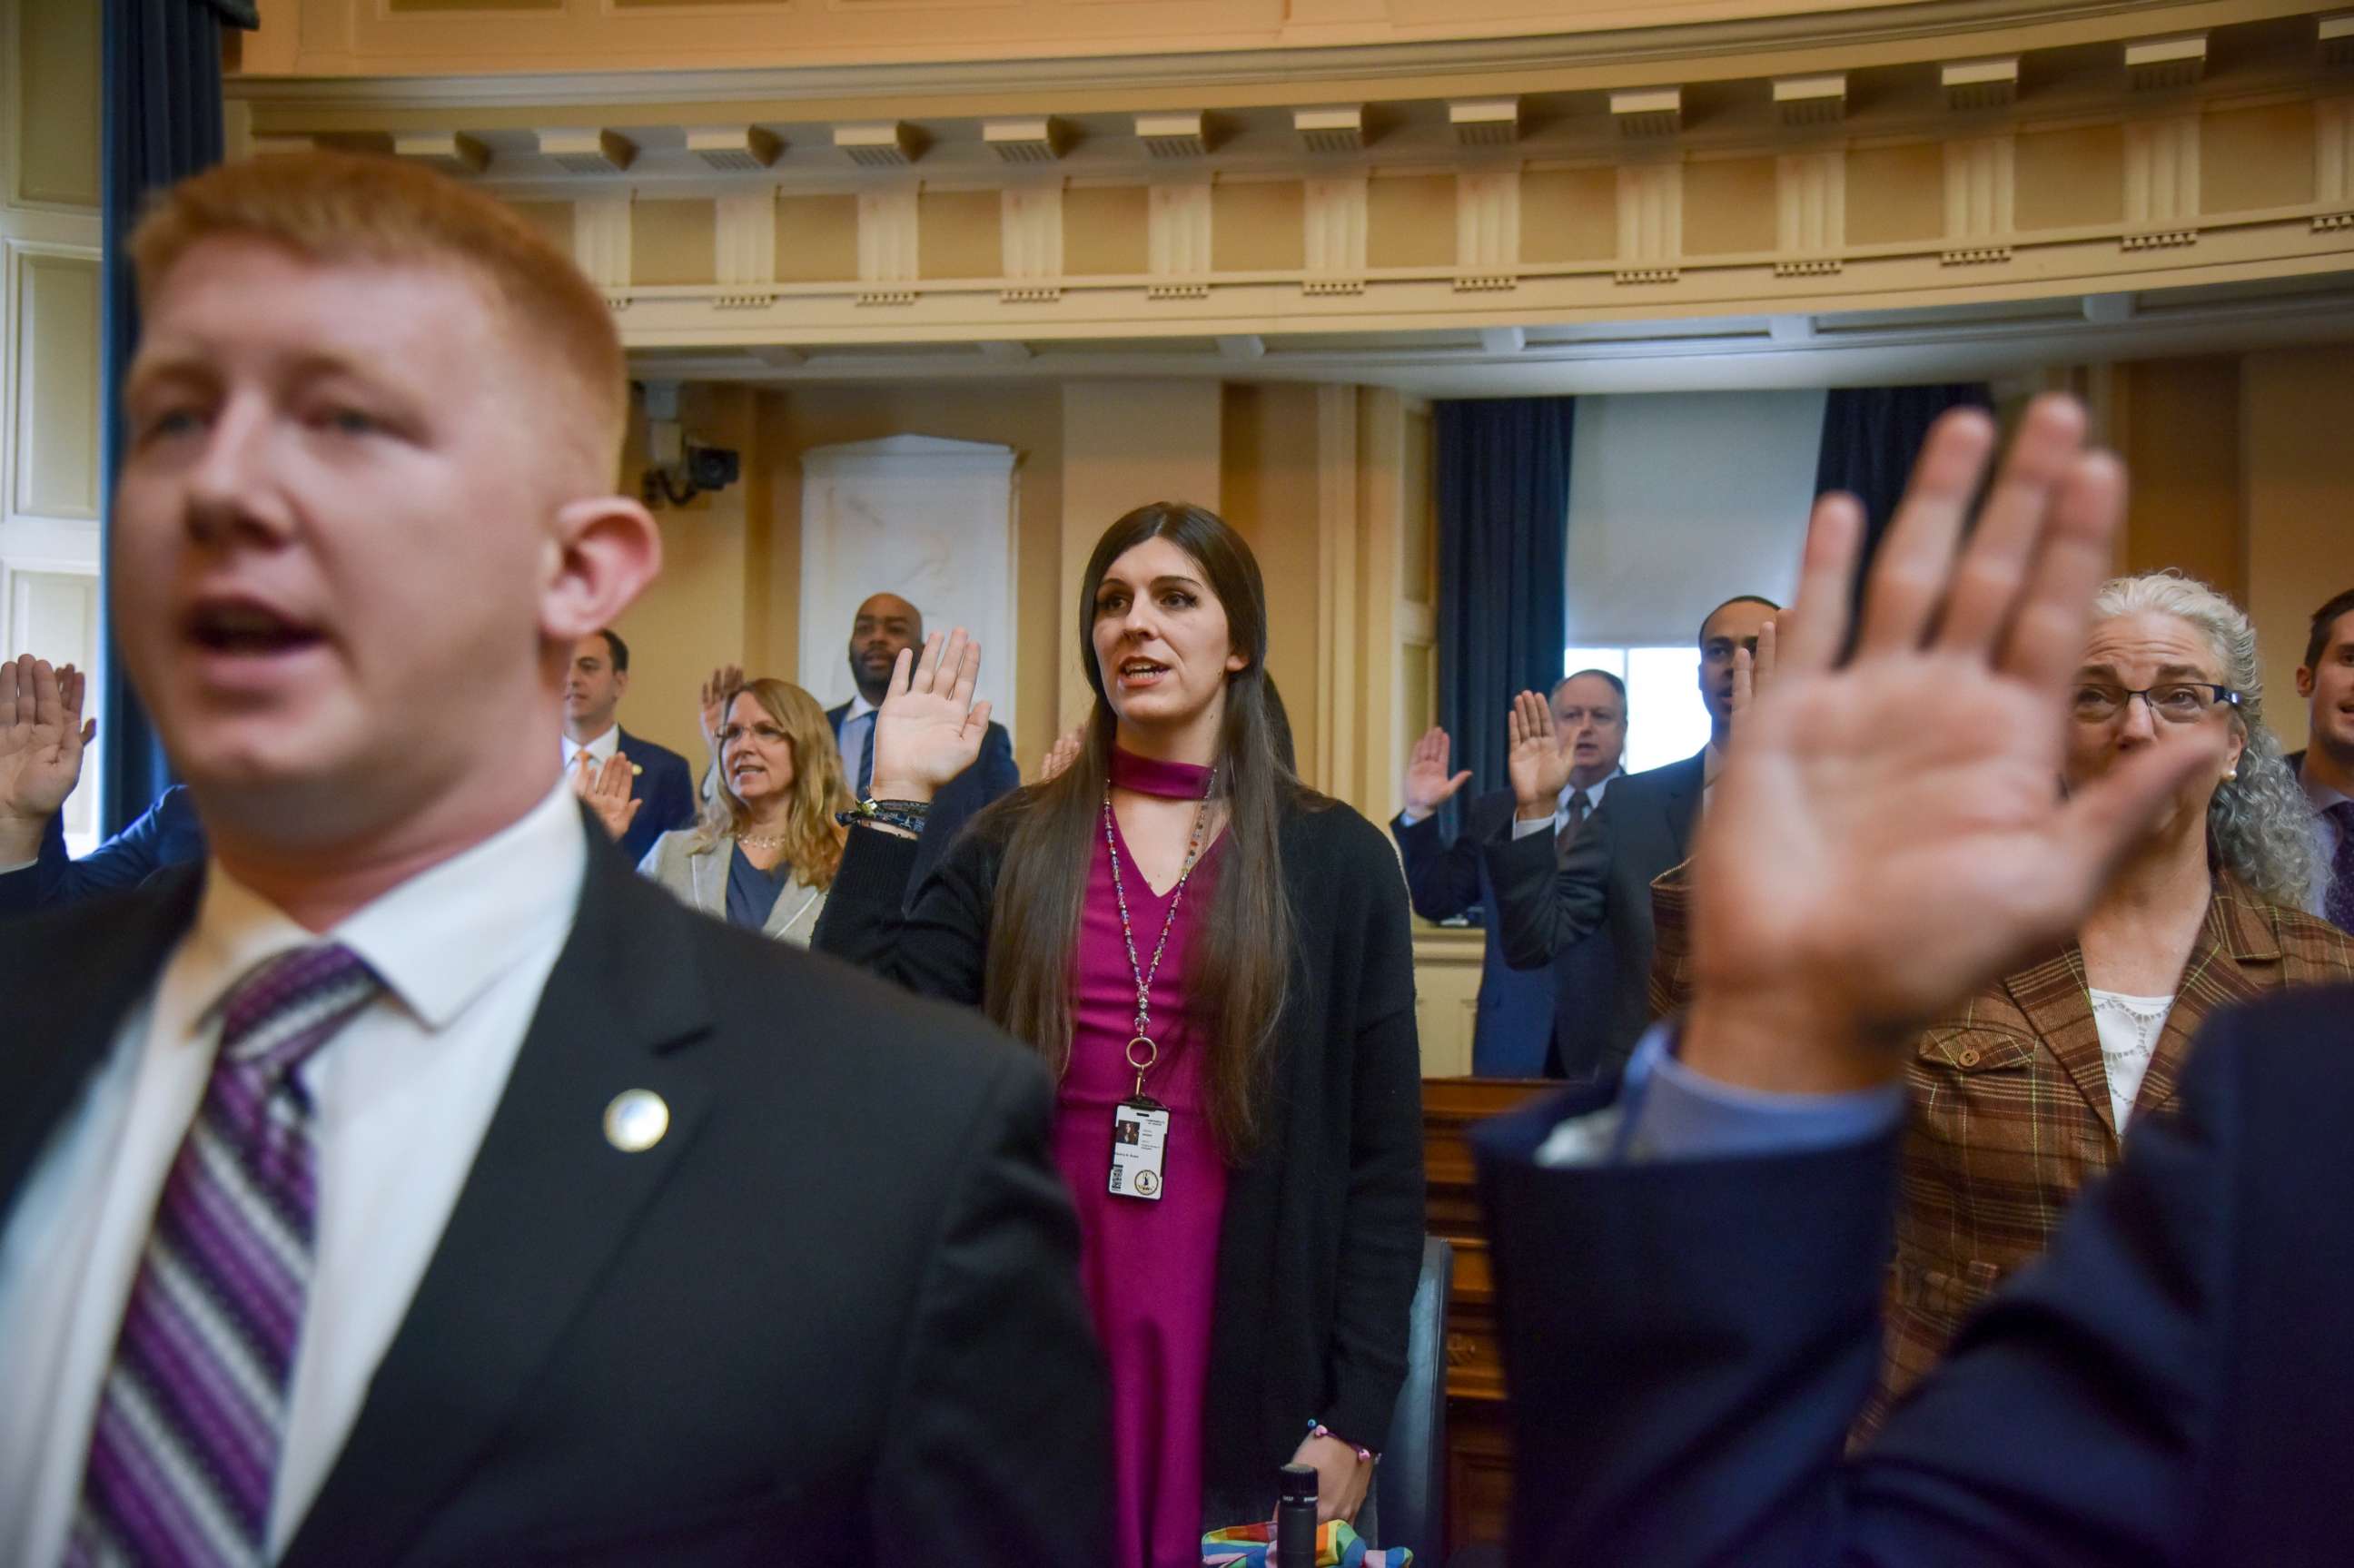 PHOTO: Delegate Danica Roem, center, and other delegates are sworn in on the floor of the House of Delegates at the Virginia State Capitol, Jan. 10, 2018, in Richmond, VA.